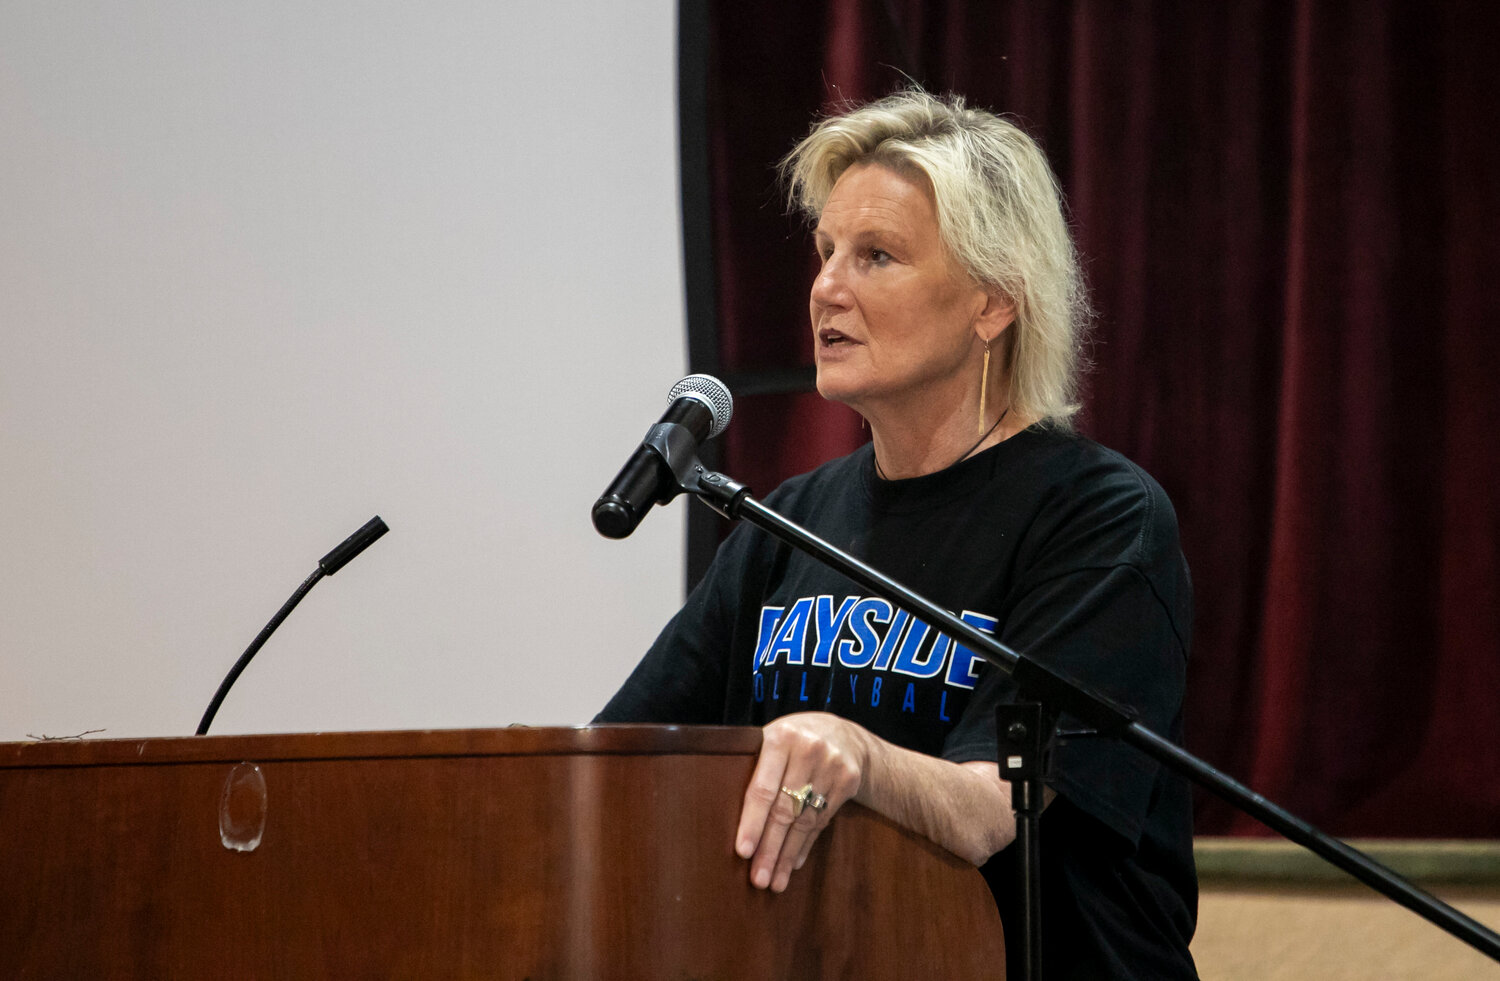 Ann Schilling meets with the media at Trojan Hall in Daphne as part of the Volleyball Media Day on Monday, Aug. 7. Entering her 37th year as the head volleyball coach at Bayside Academy, the Admirals will be on a quest for their 22nd consecutive state title this season.